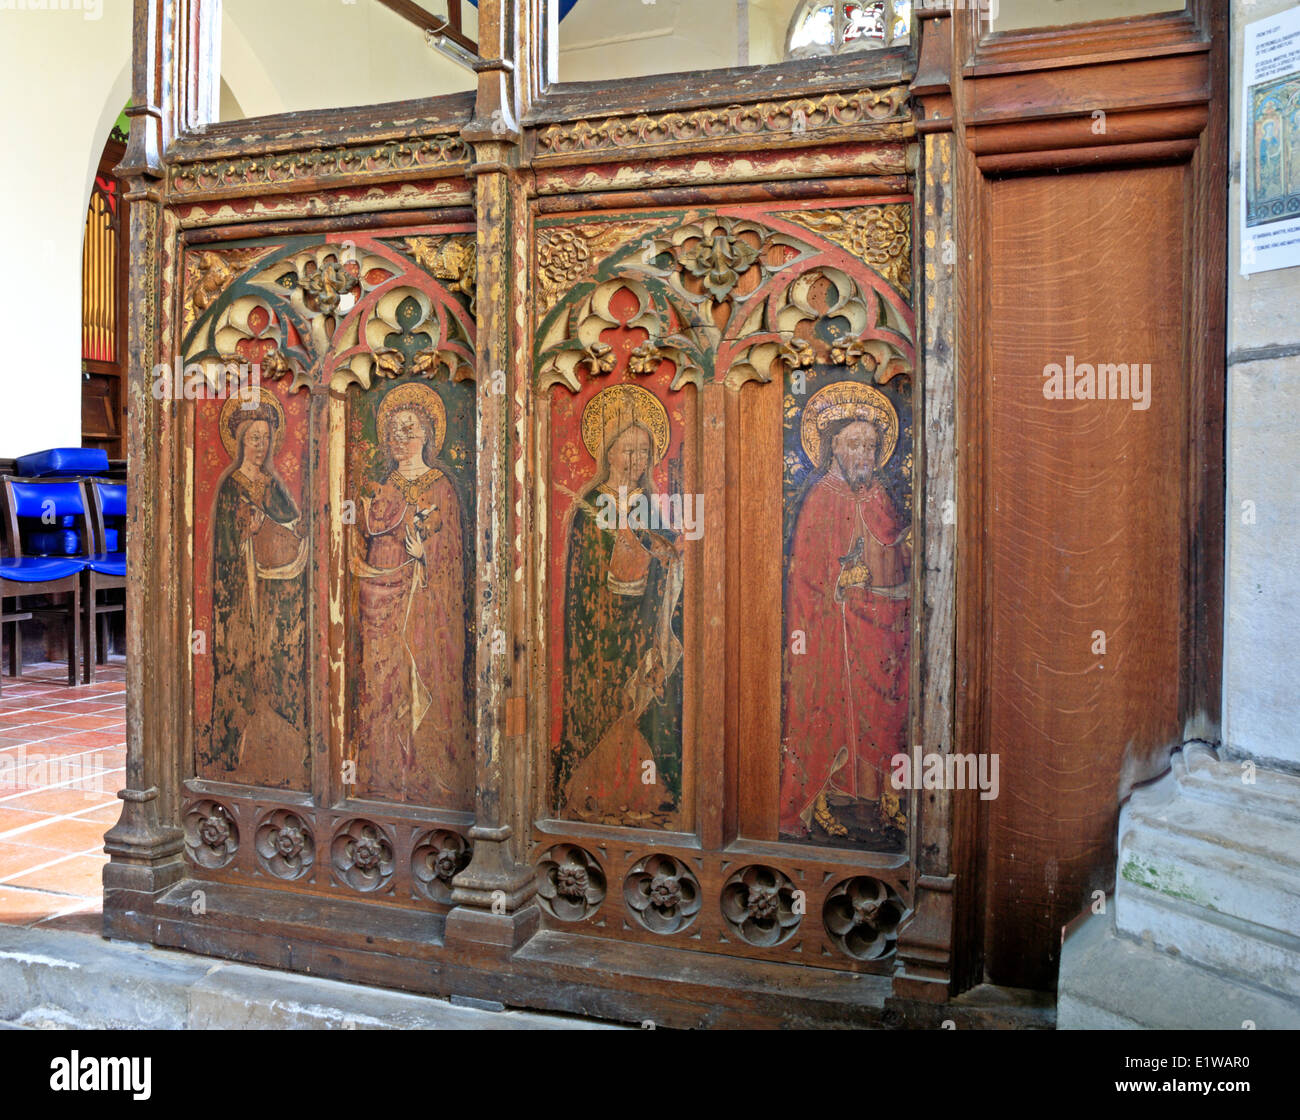 A view of the rood screen on the south side of the entrance to the chancel at Trimingham parish church, Norfolk, England, UK. Stock Photo